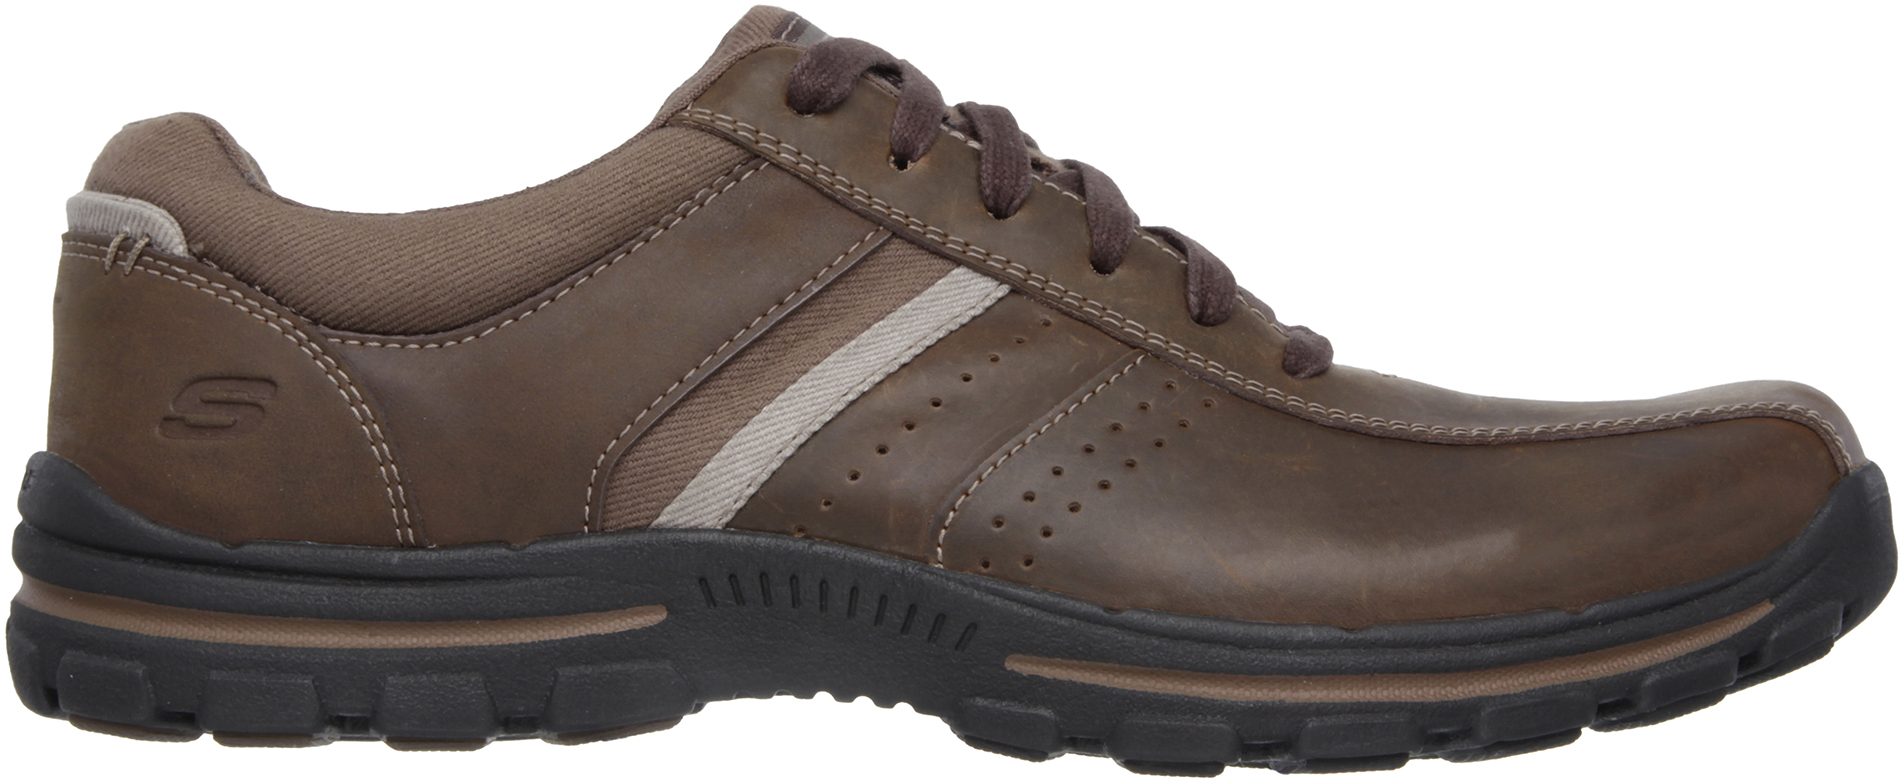 Skechers Braver - Alfano Brown 64529 ACDB - Casual Shoes - Humphries Shoes